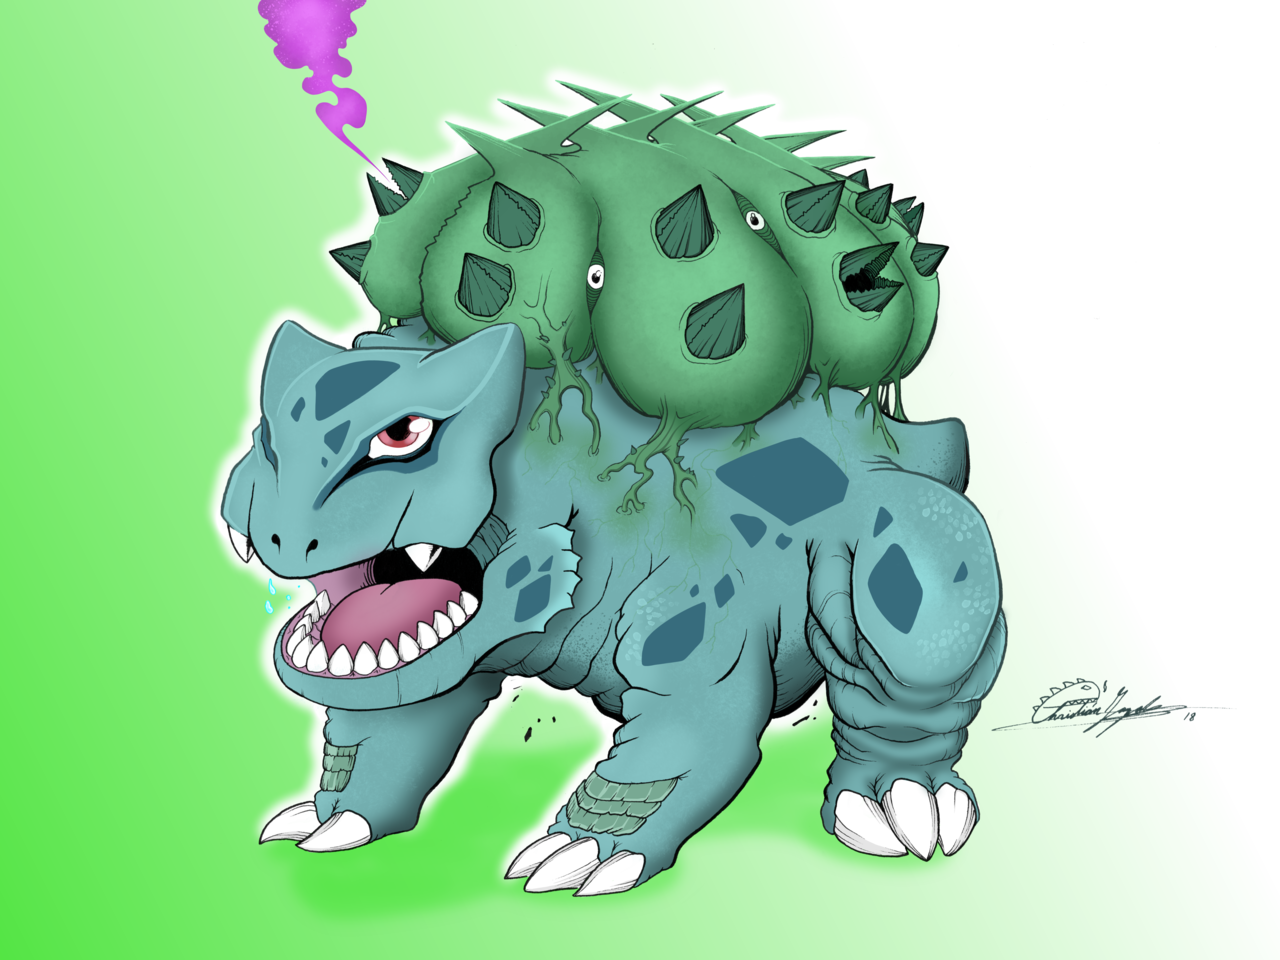 seaguns:
“Unveiling my new ongoing project: POCKET KAIJU! I.e. redesigning all 151 original Pokemon as kaiju with fleshed out “Kaijudex” entries. A bit of a passion project that I want do so I can better my illustration techniques as well as my...